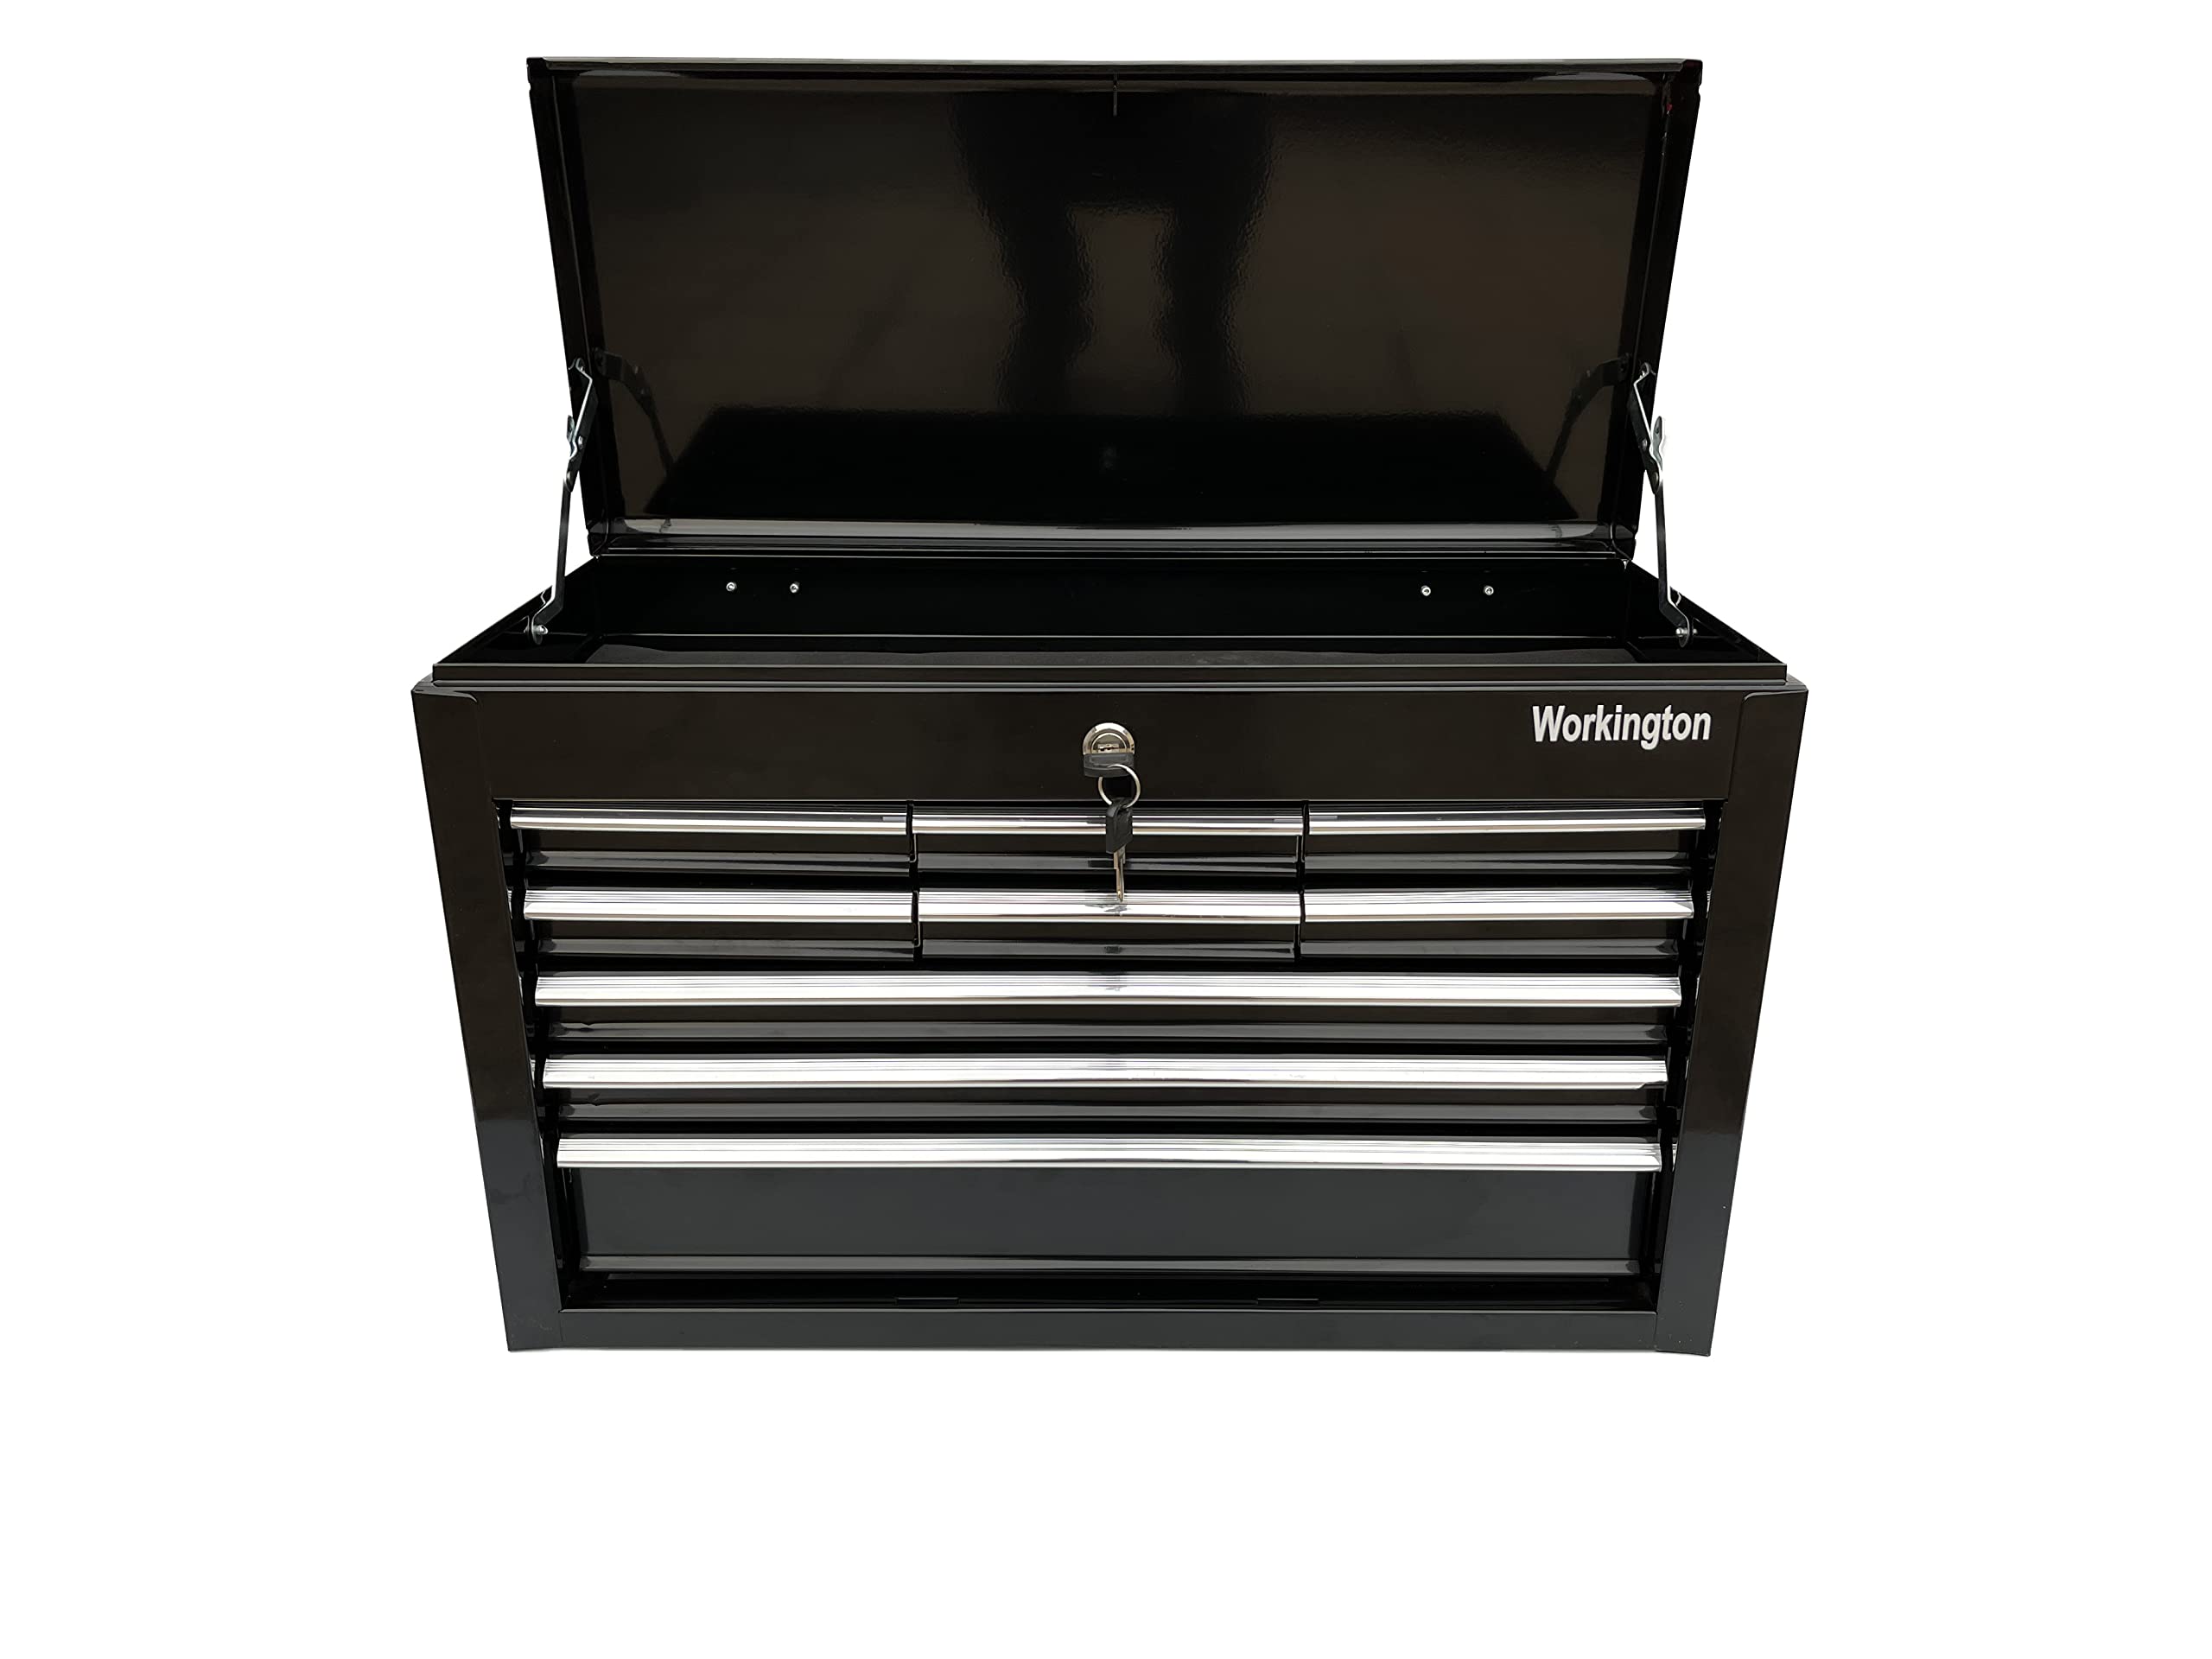 Workington Portable Metal Tool Chest with 9 Drawers, 24" 9-Drawer Tool Chest Cabinet with Ball Bearing Drawer Slides, Steel Tool Storage Box Organizer 4006 Black